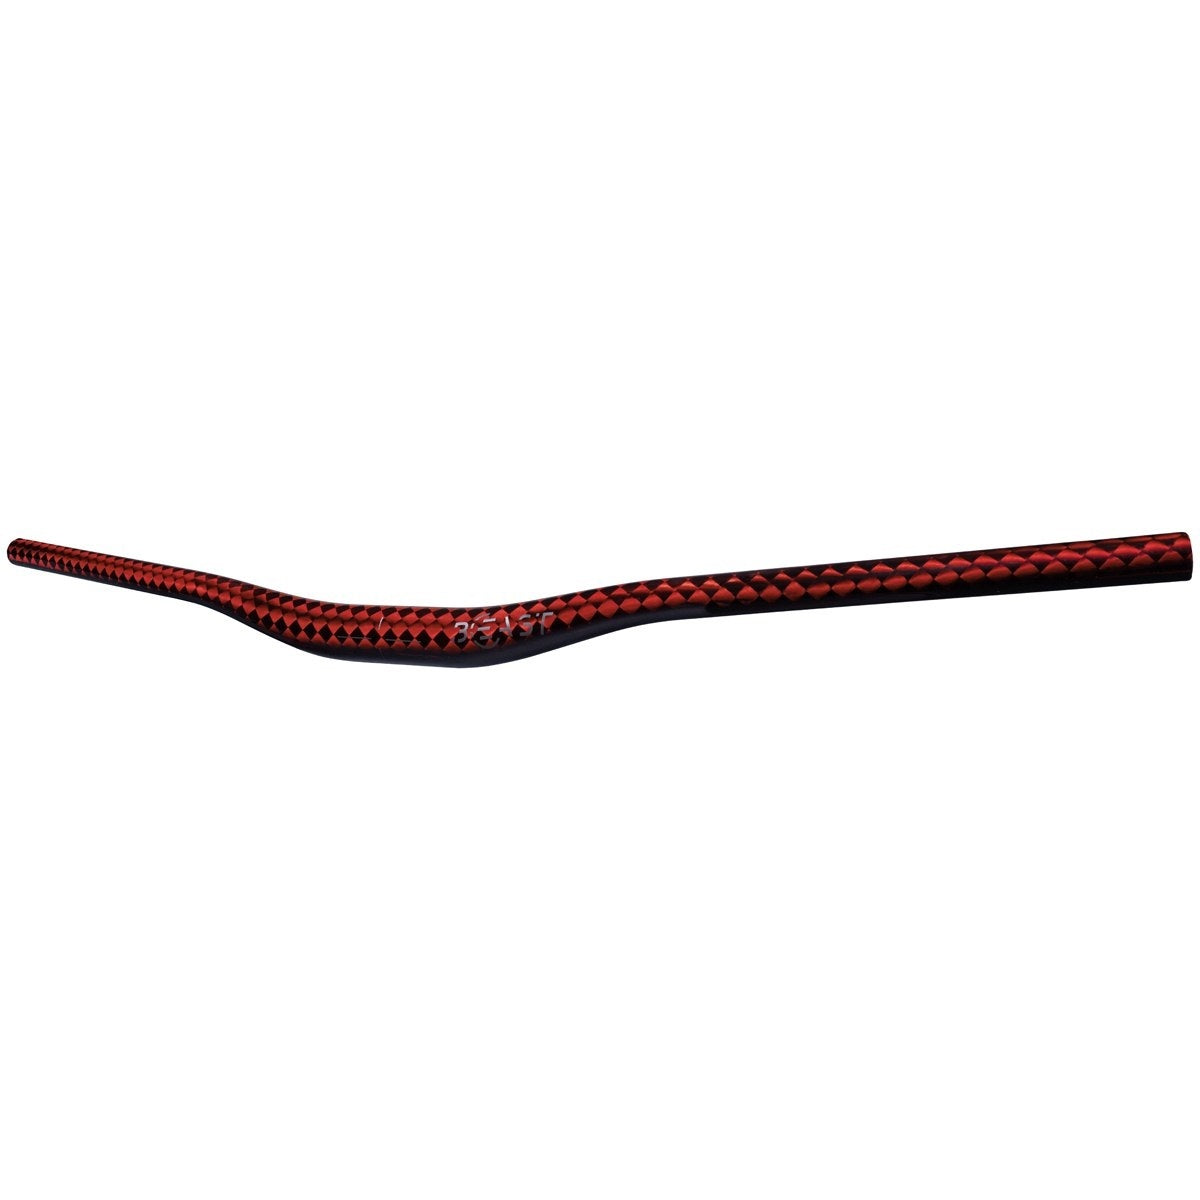 RISER BAR 25 SQUARE Red - Beast Components